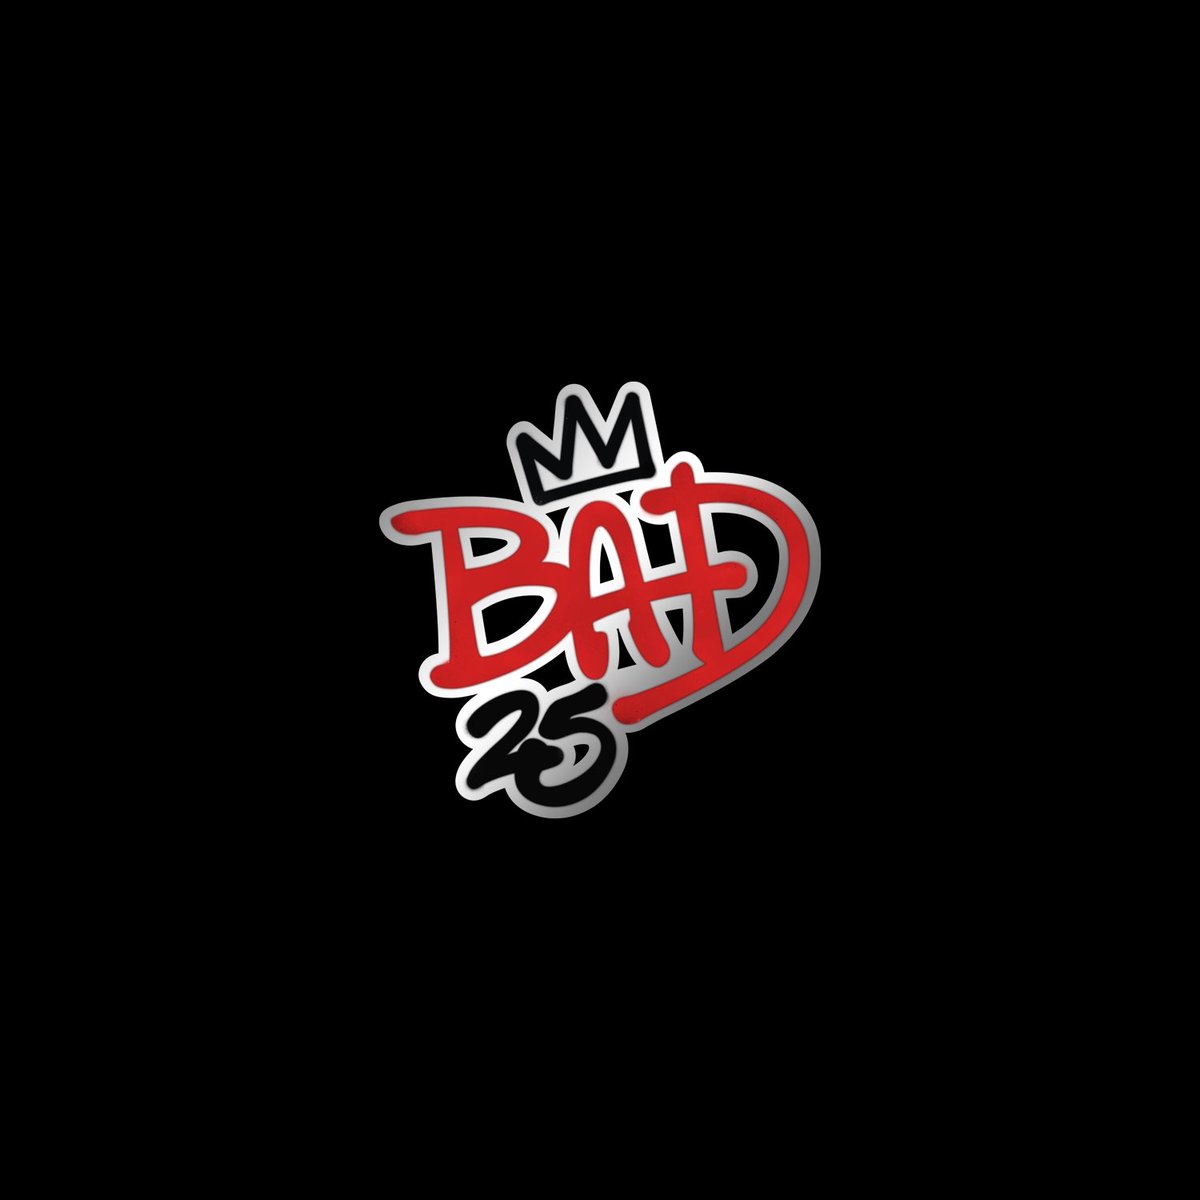 Bad 25 by Michael Jackson has now surpassed 1.8 billion streams on Spotify 👑